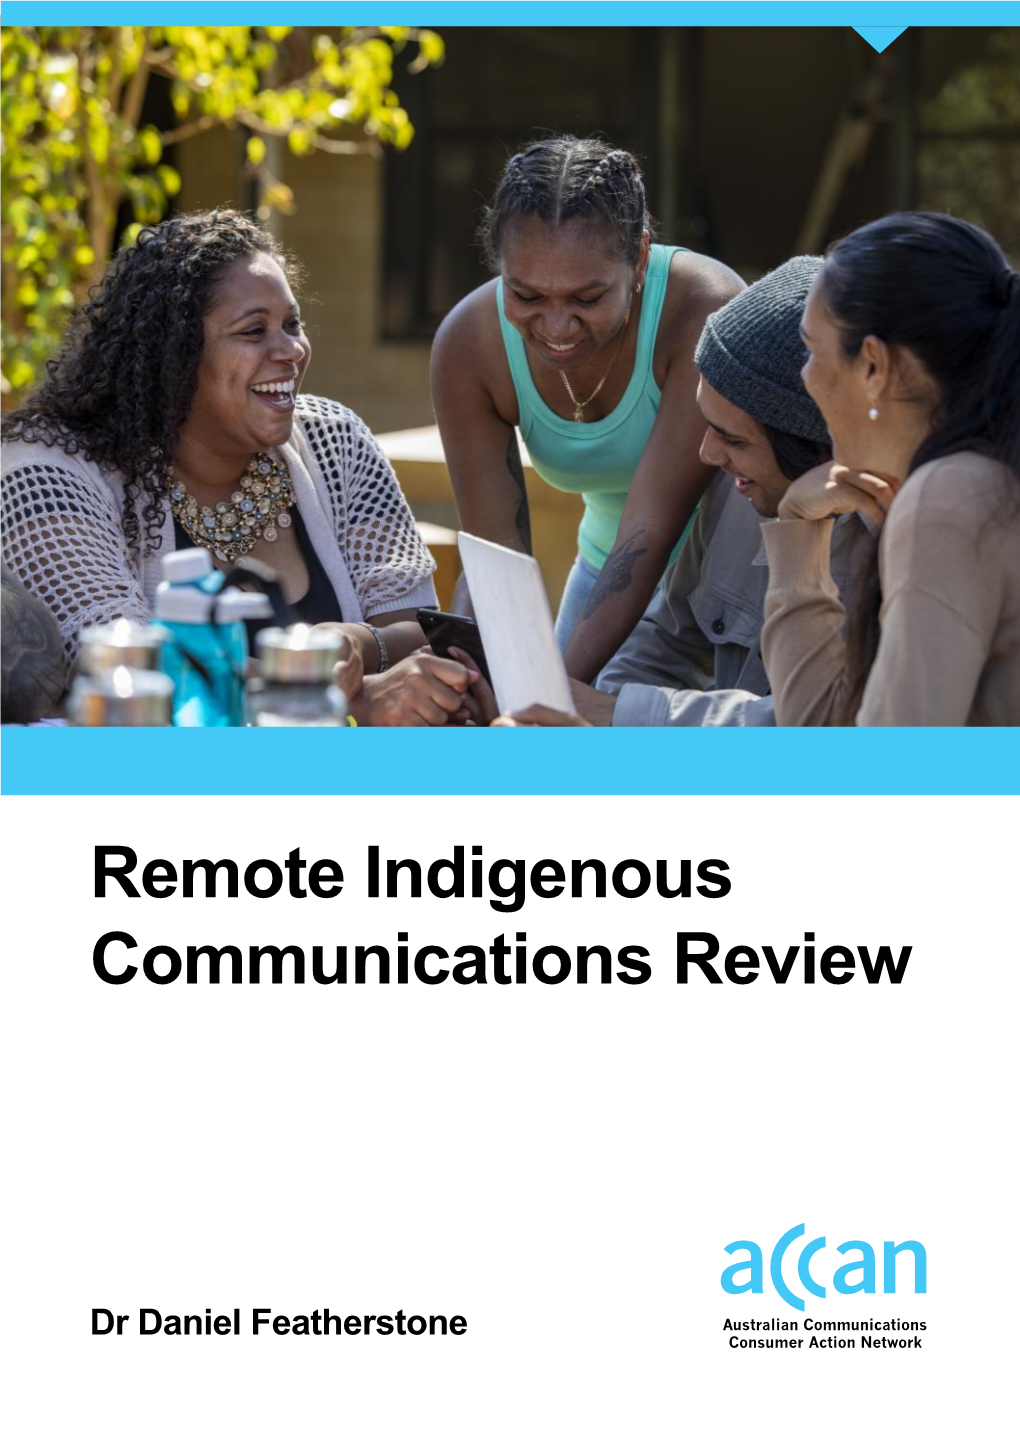 Remote Indigenous Communications Review